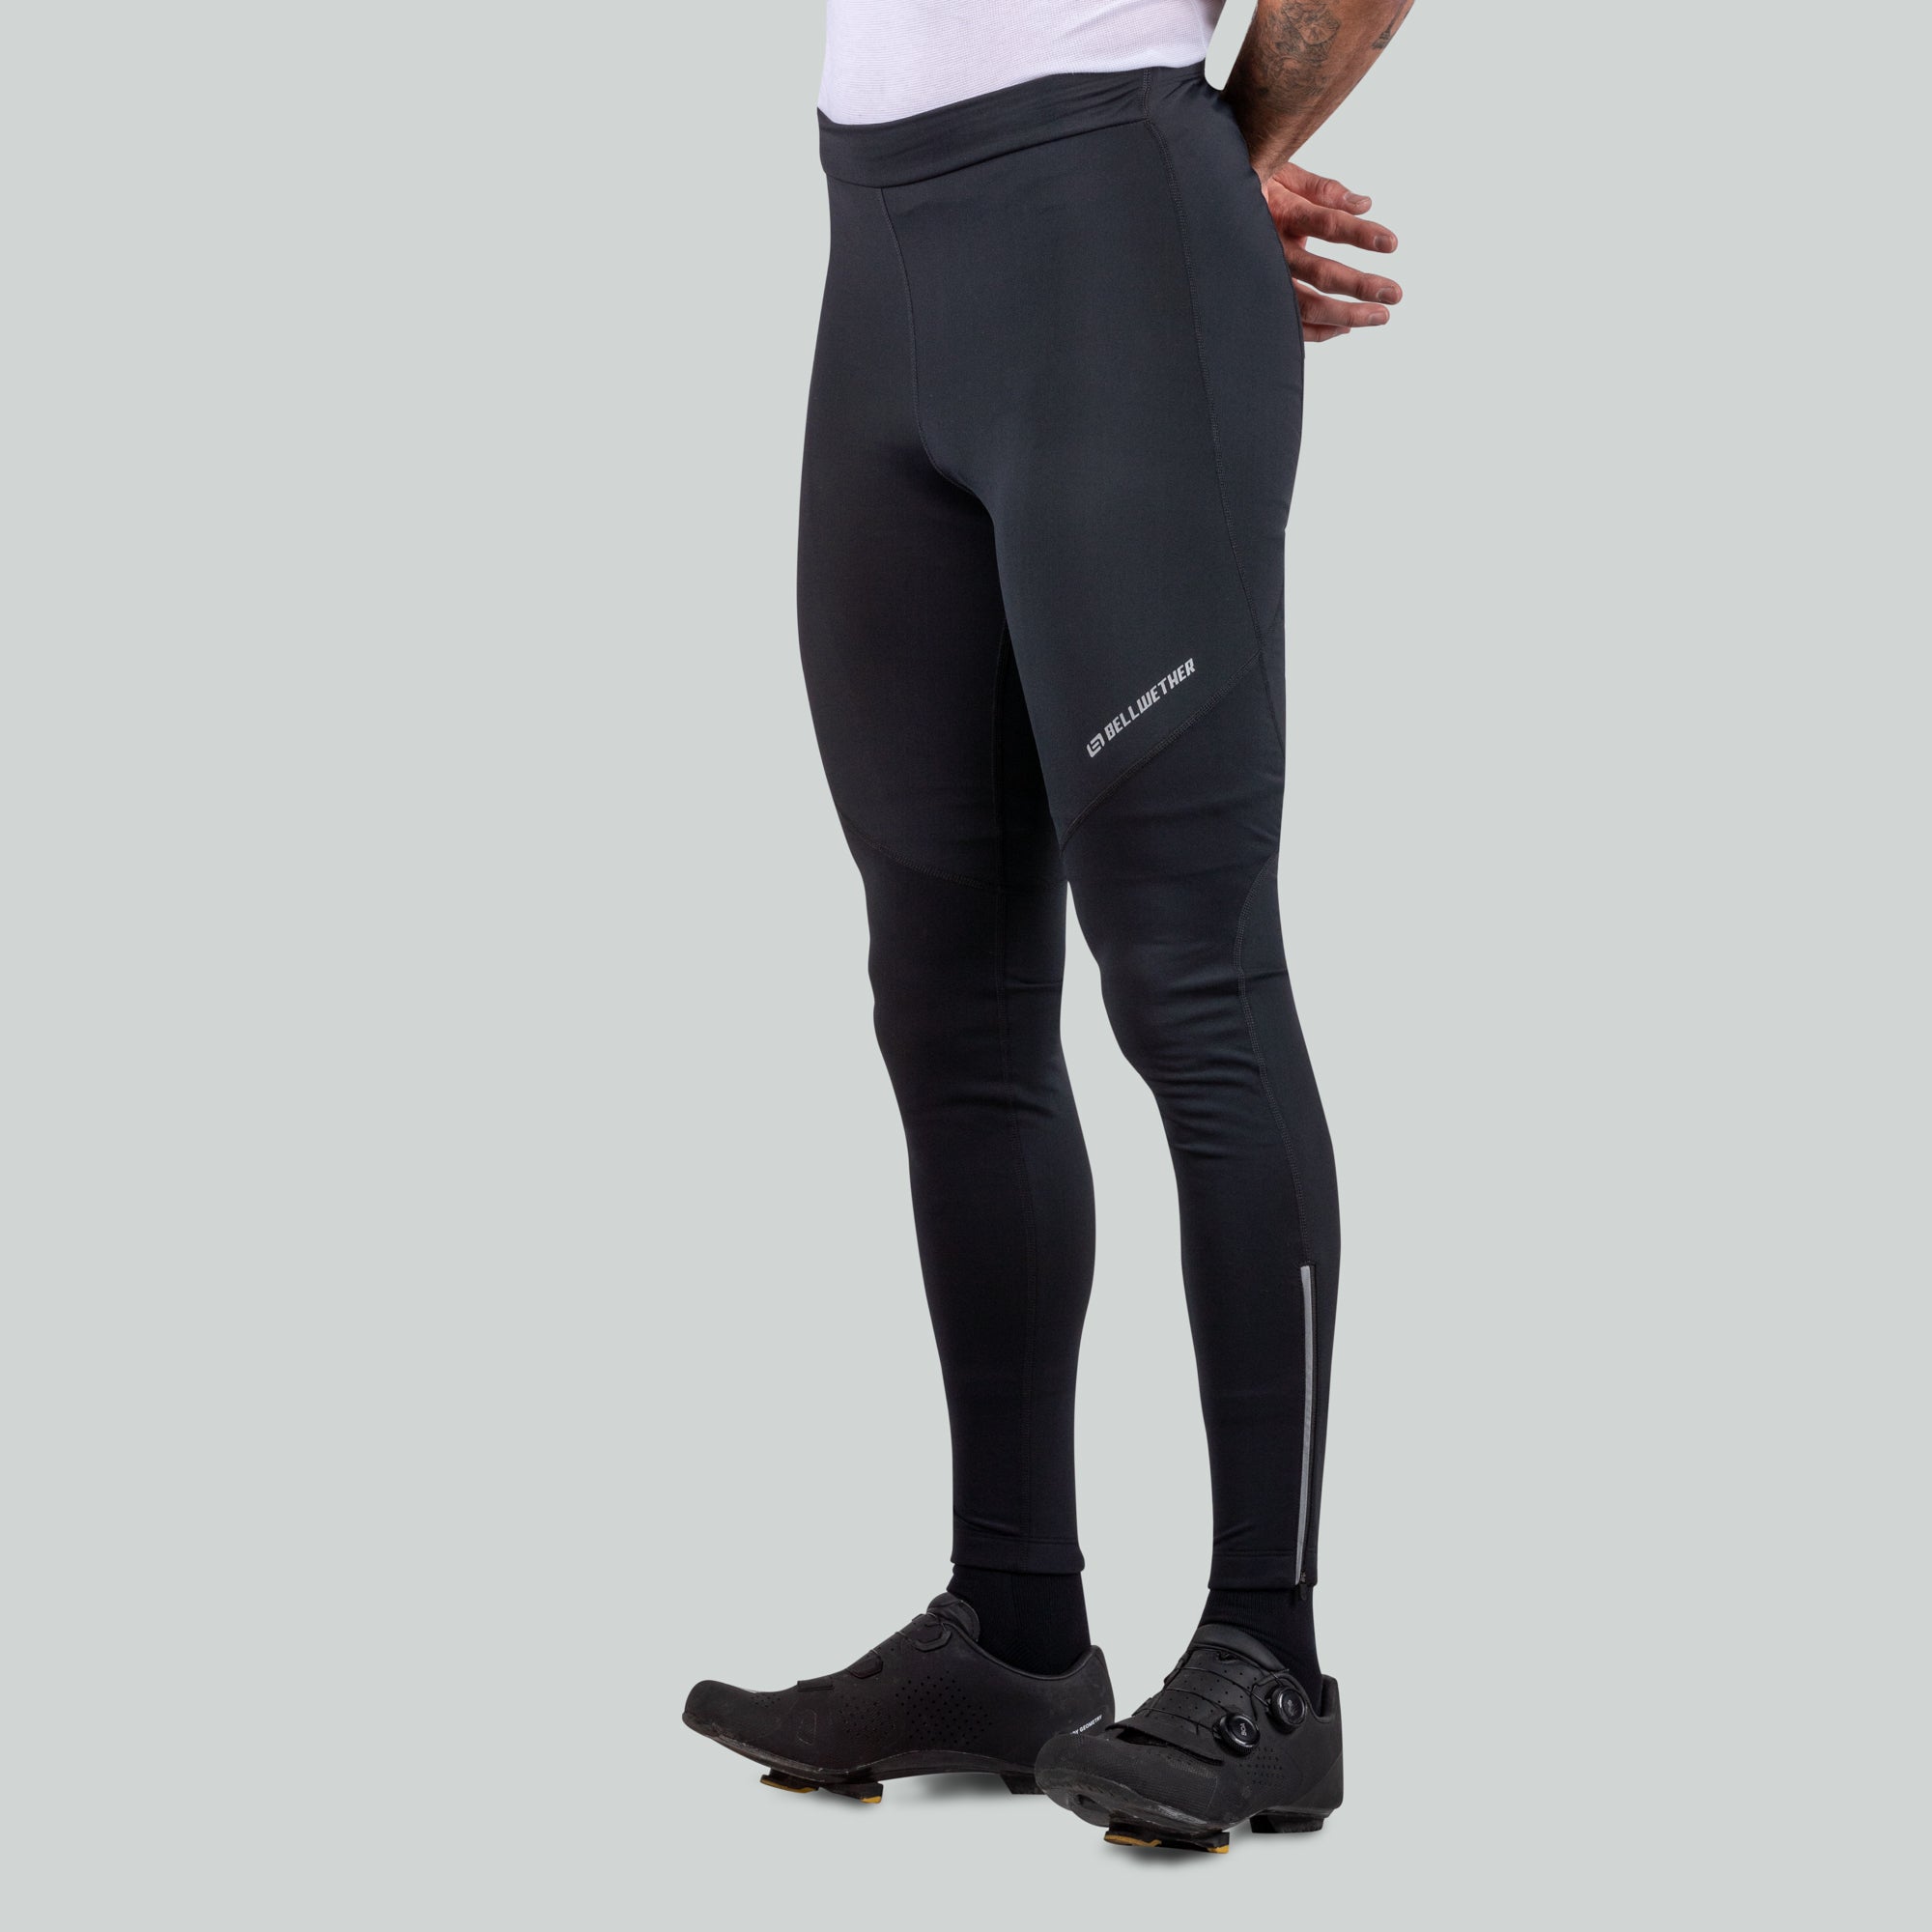 Men's Thermaldress Tight without Pad